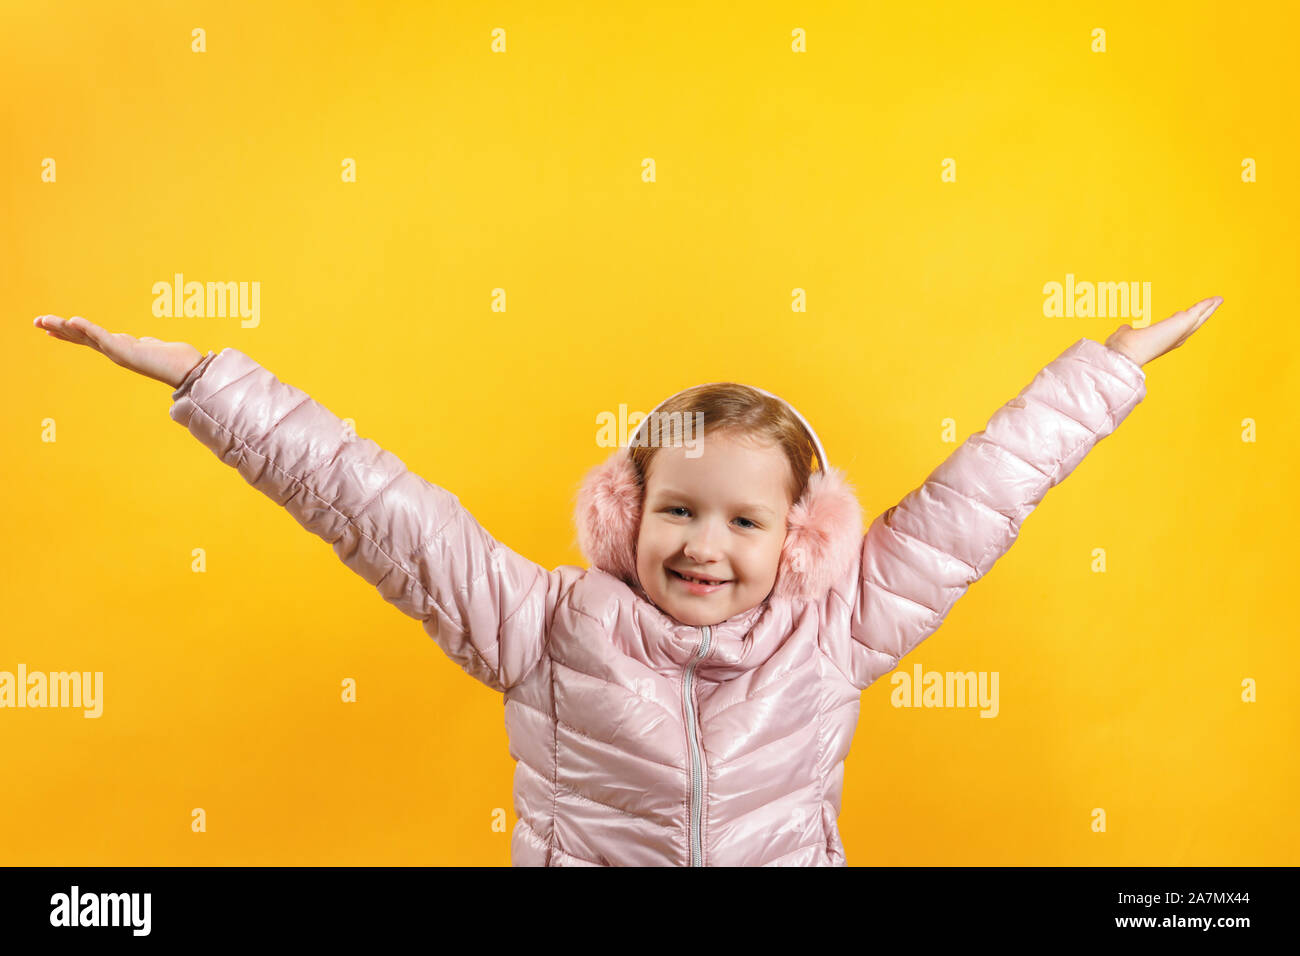 The child in a jacket and warm headphones raised her hands up. Little girl on a yellow background. The concept of happiness, winter, autumn. Stock Photo